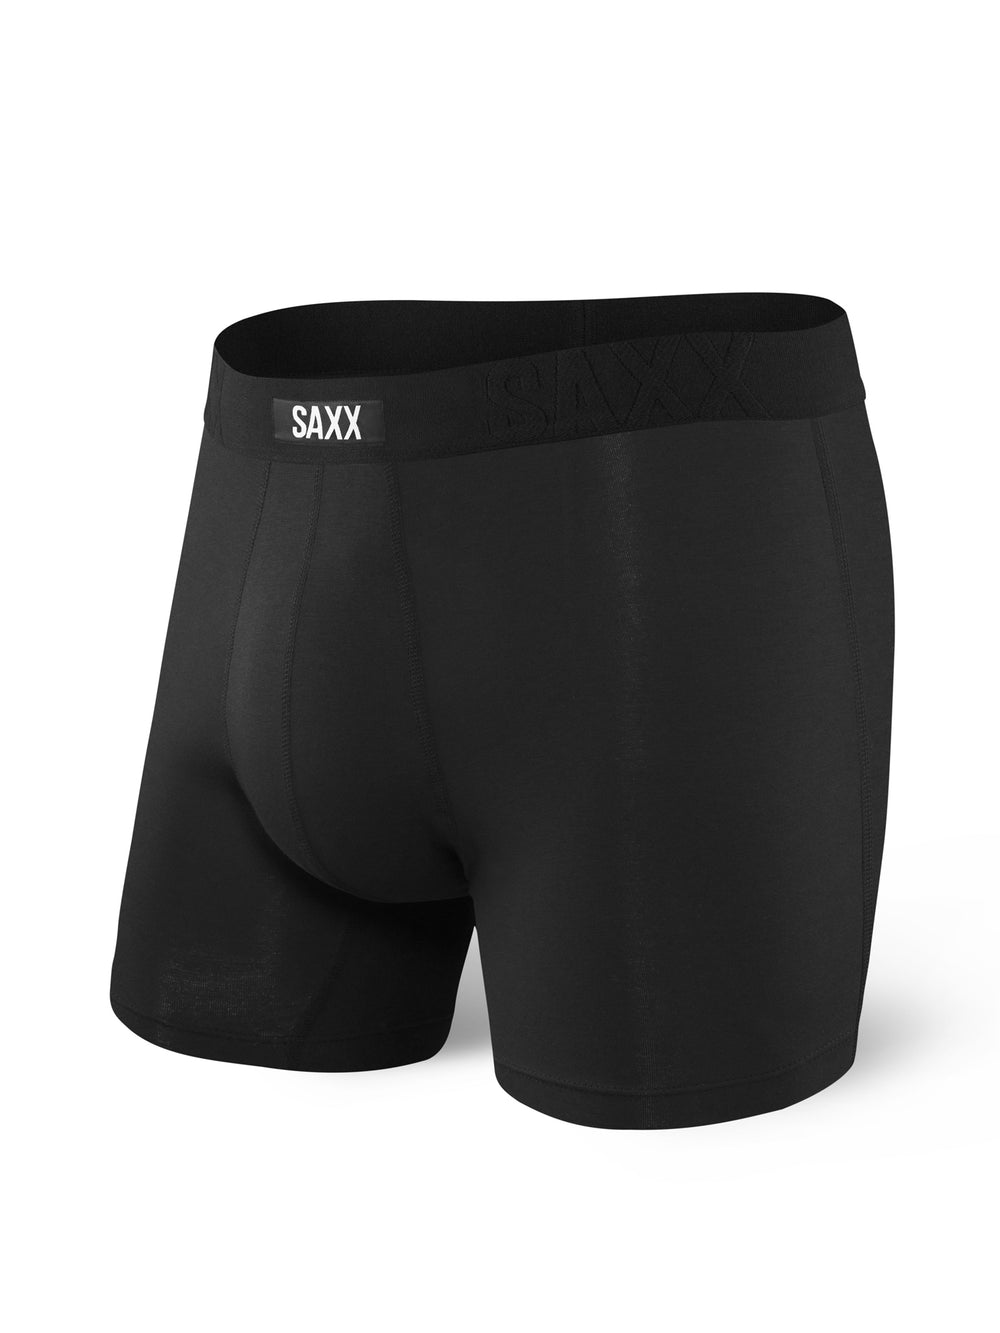 SAXX UNDERCOVER BOXER BRIEFING - CLEARANCE